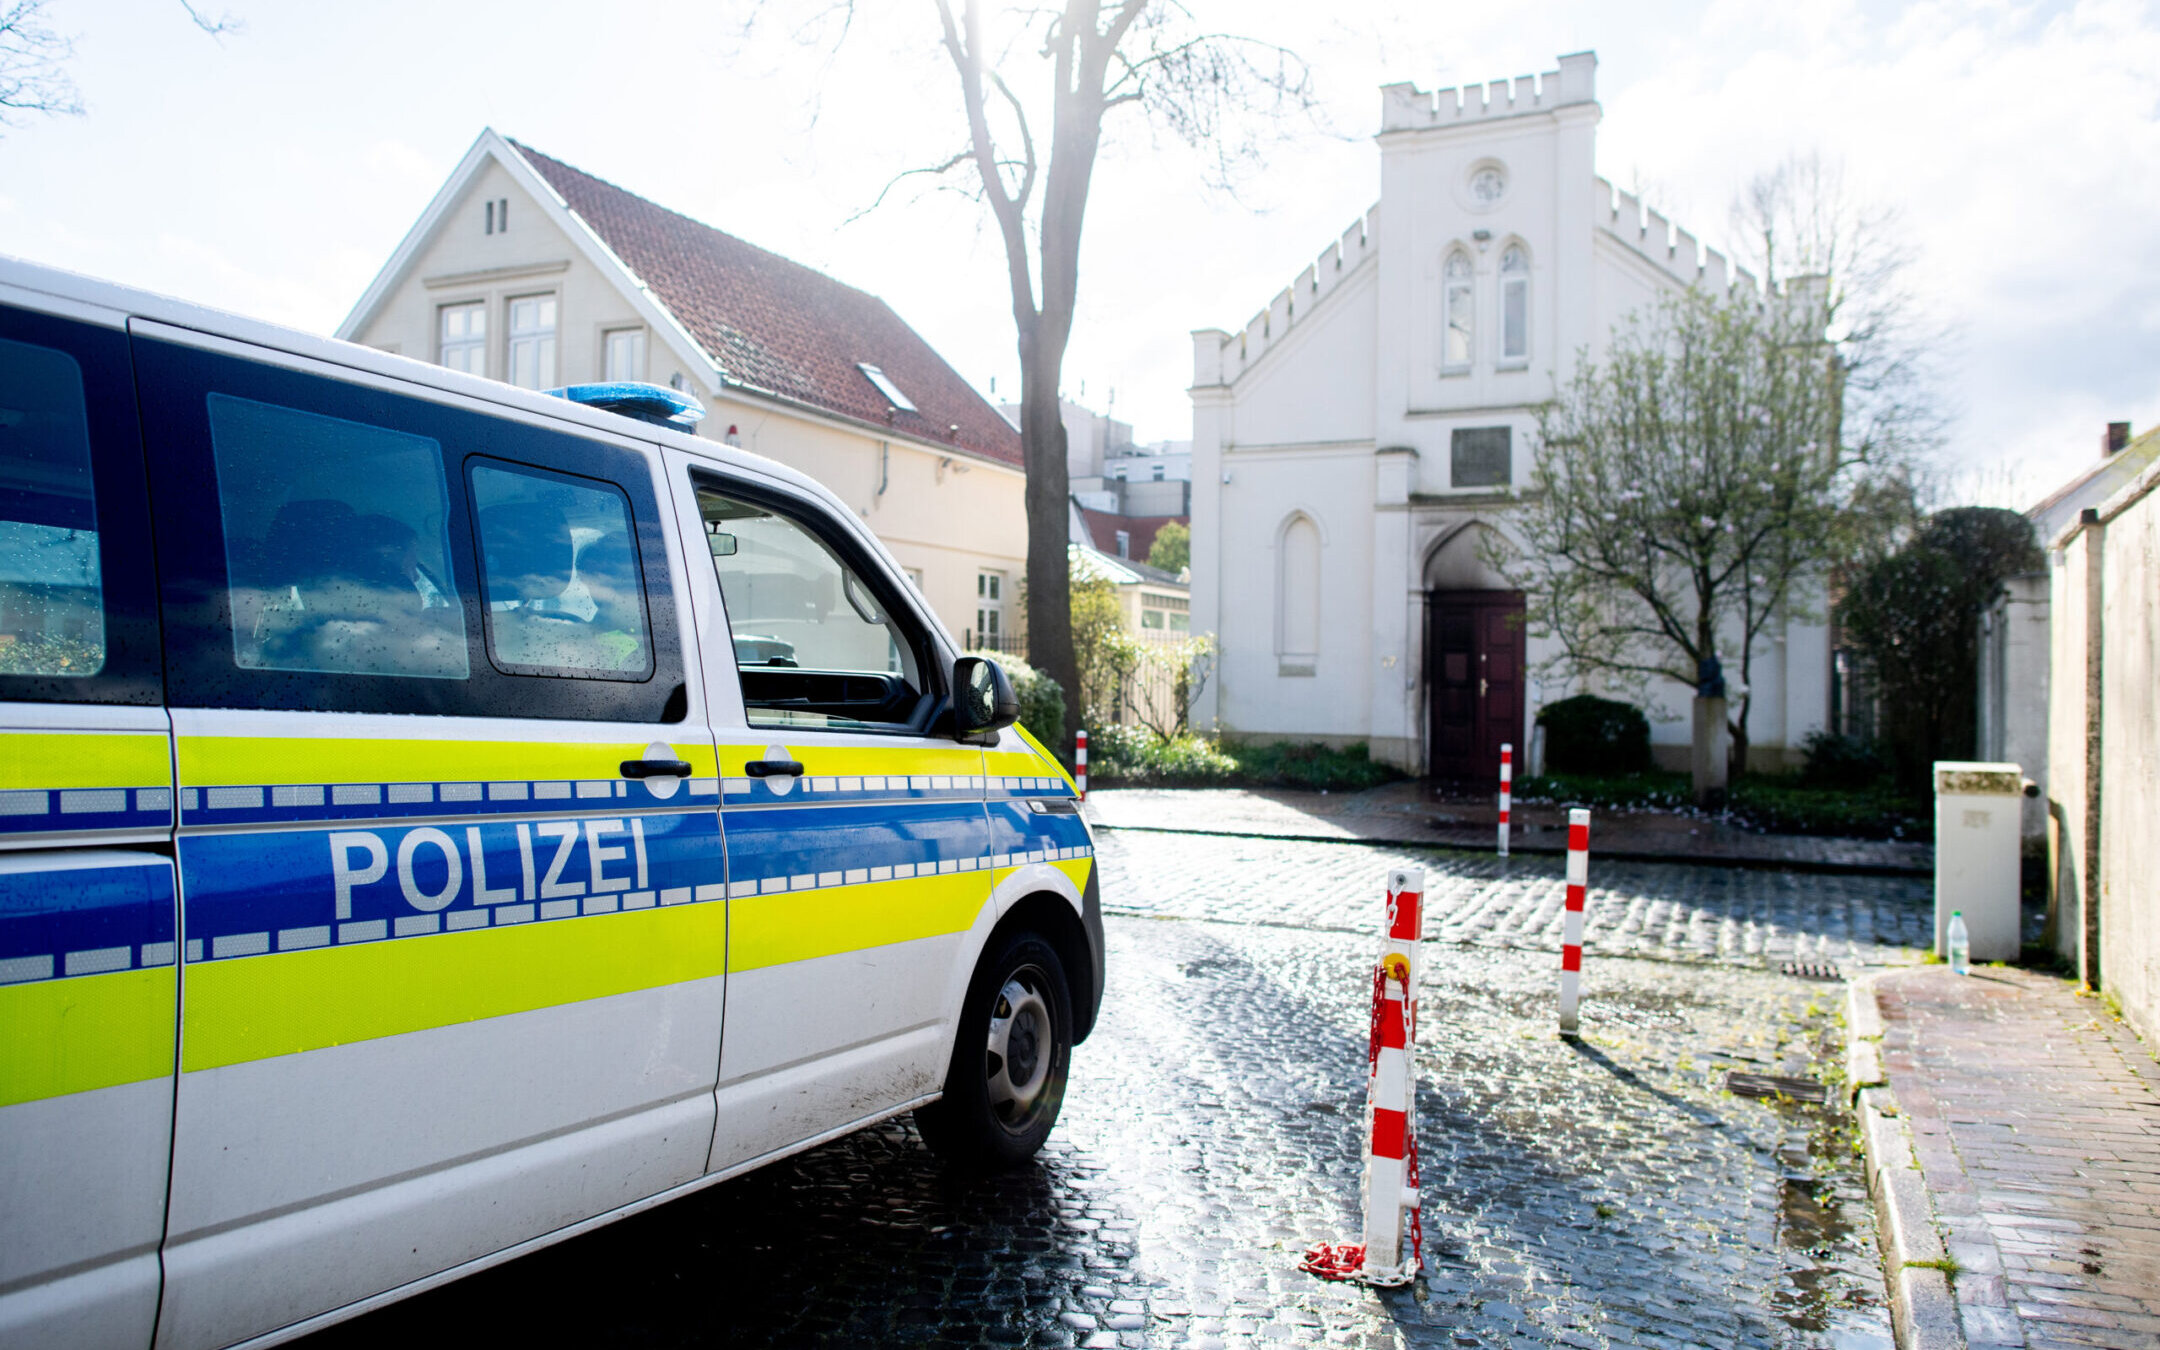 A police vehicle stands in front of the synagogue in the city center of Oldenburg, Germany, after an incendiary device was thrown at its door. (Hauke-Christian Dittrich/dpa via Getty Images)